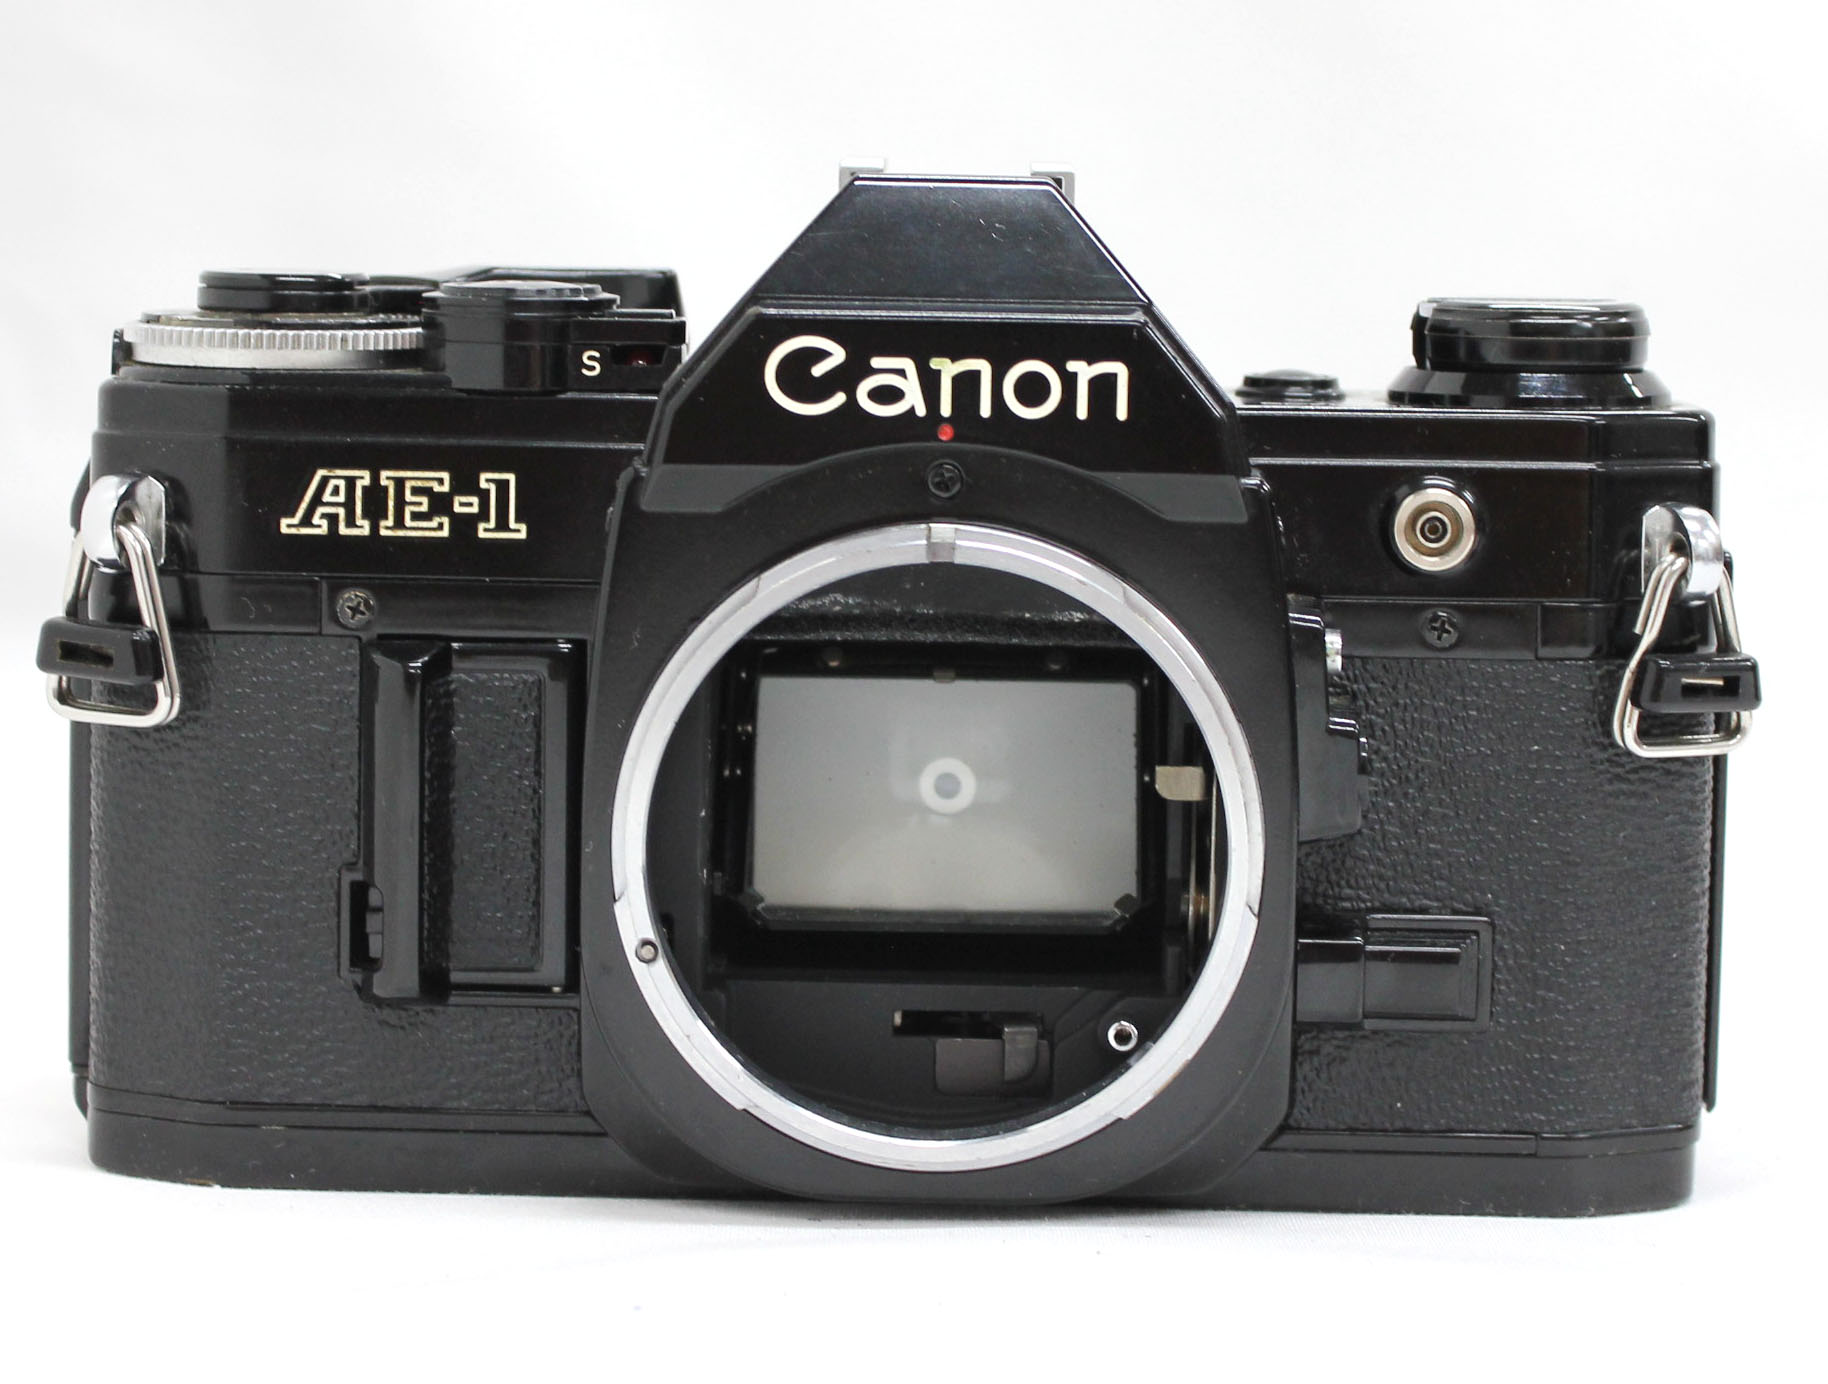 Canon AE-1 35mm SLR Film Camera with FD 50mm F/1.8 S.C. Lens from